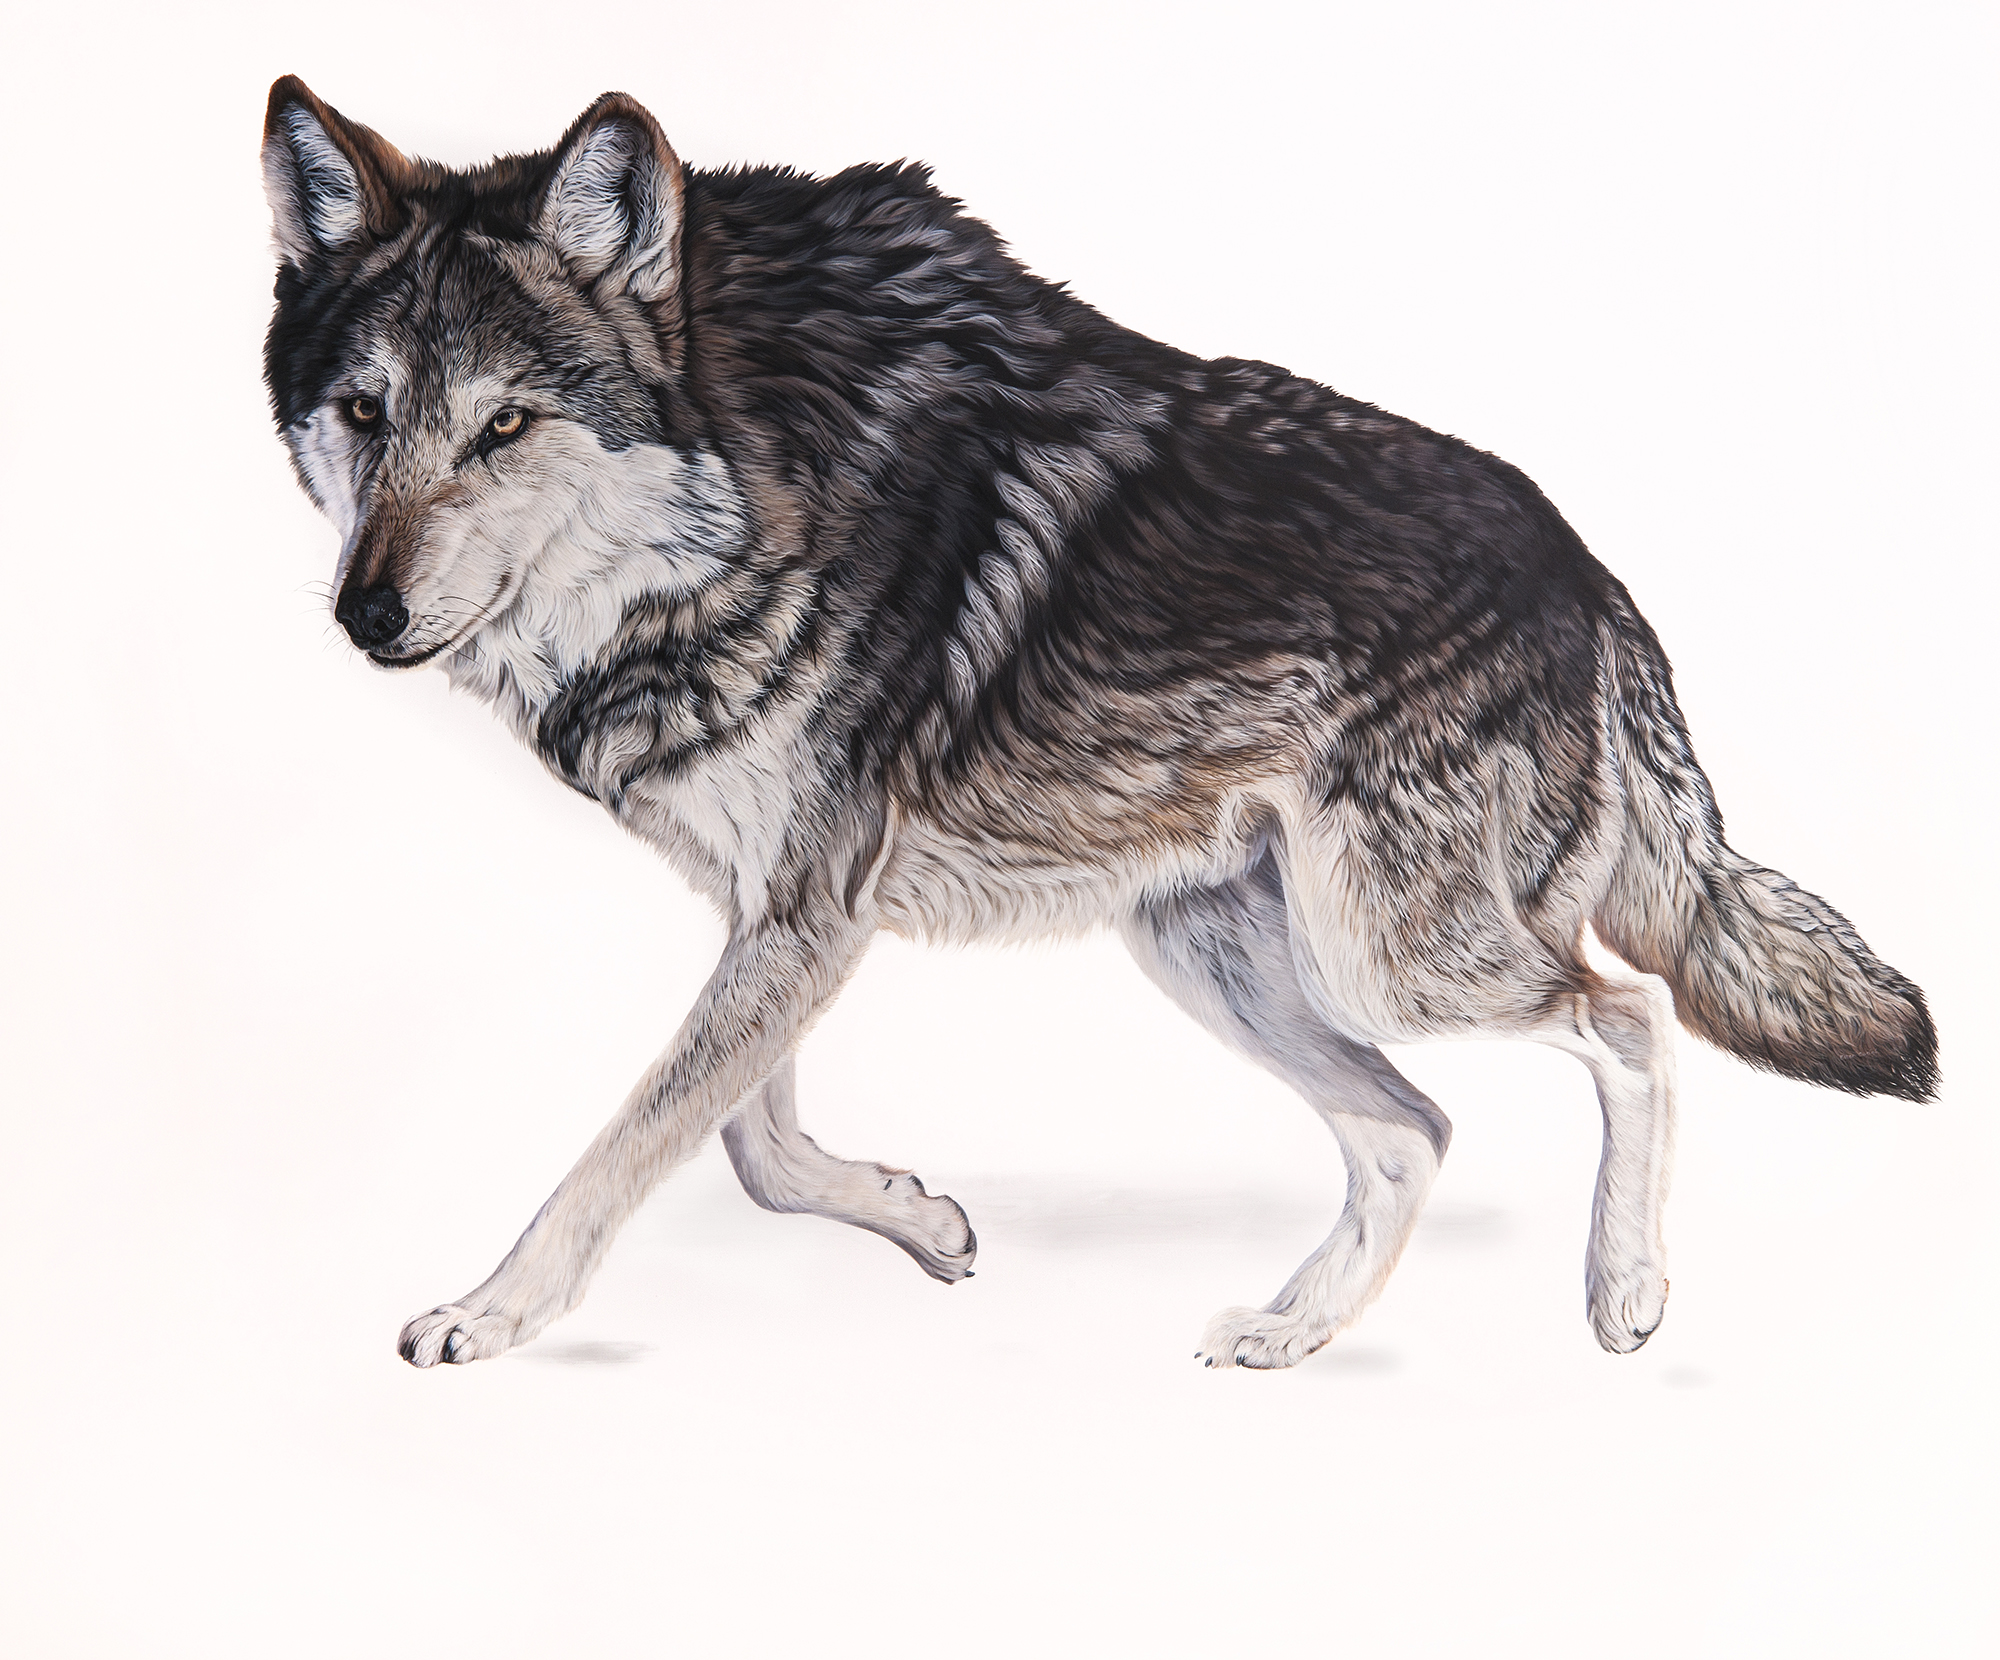 Paintings of wolves